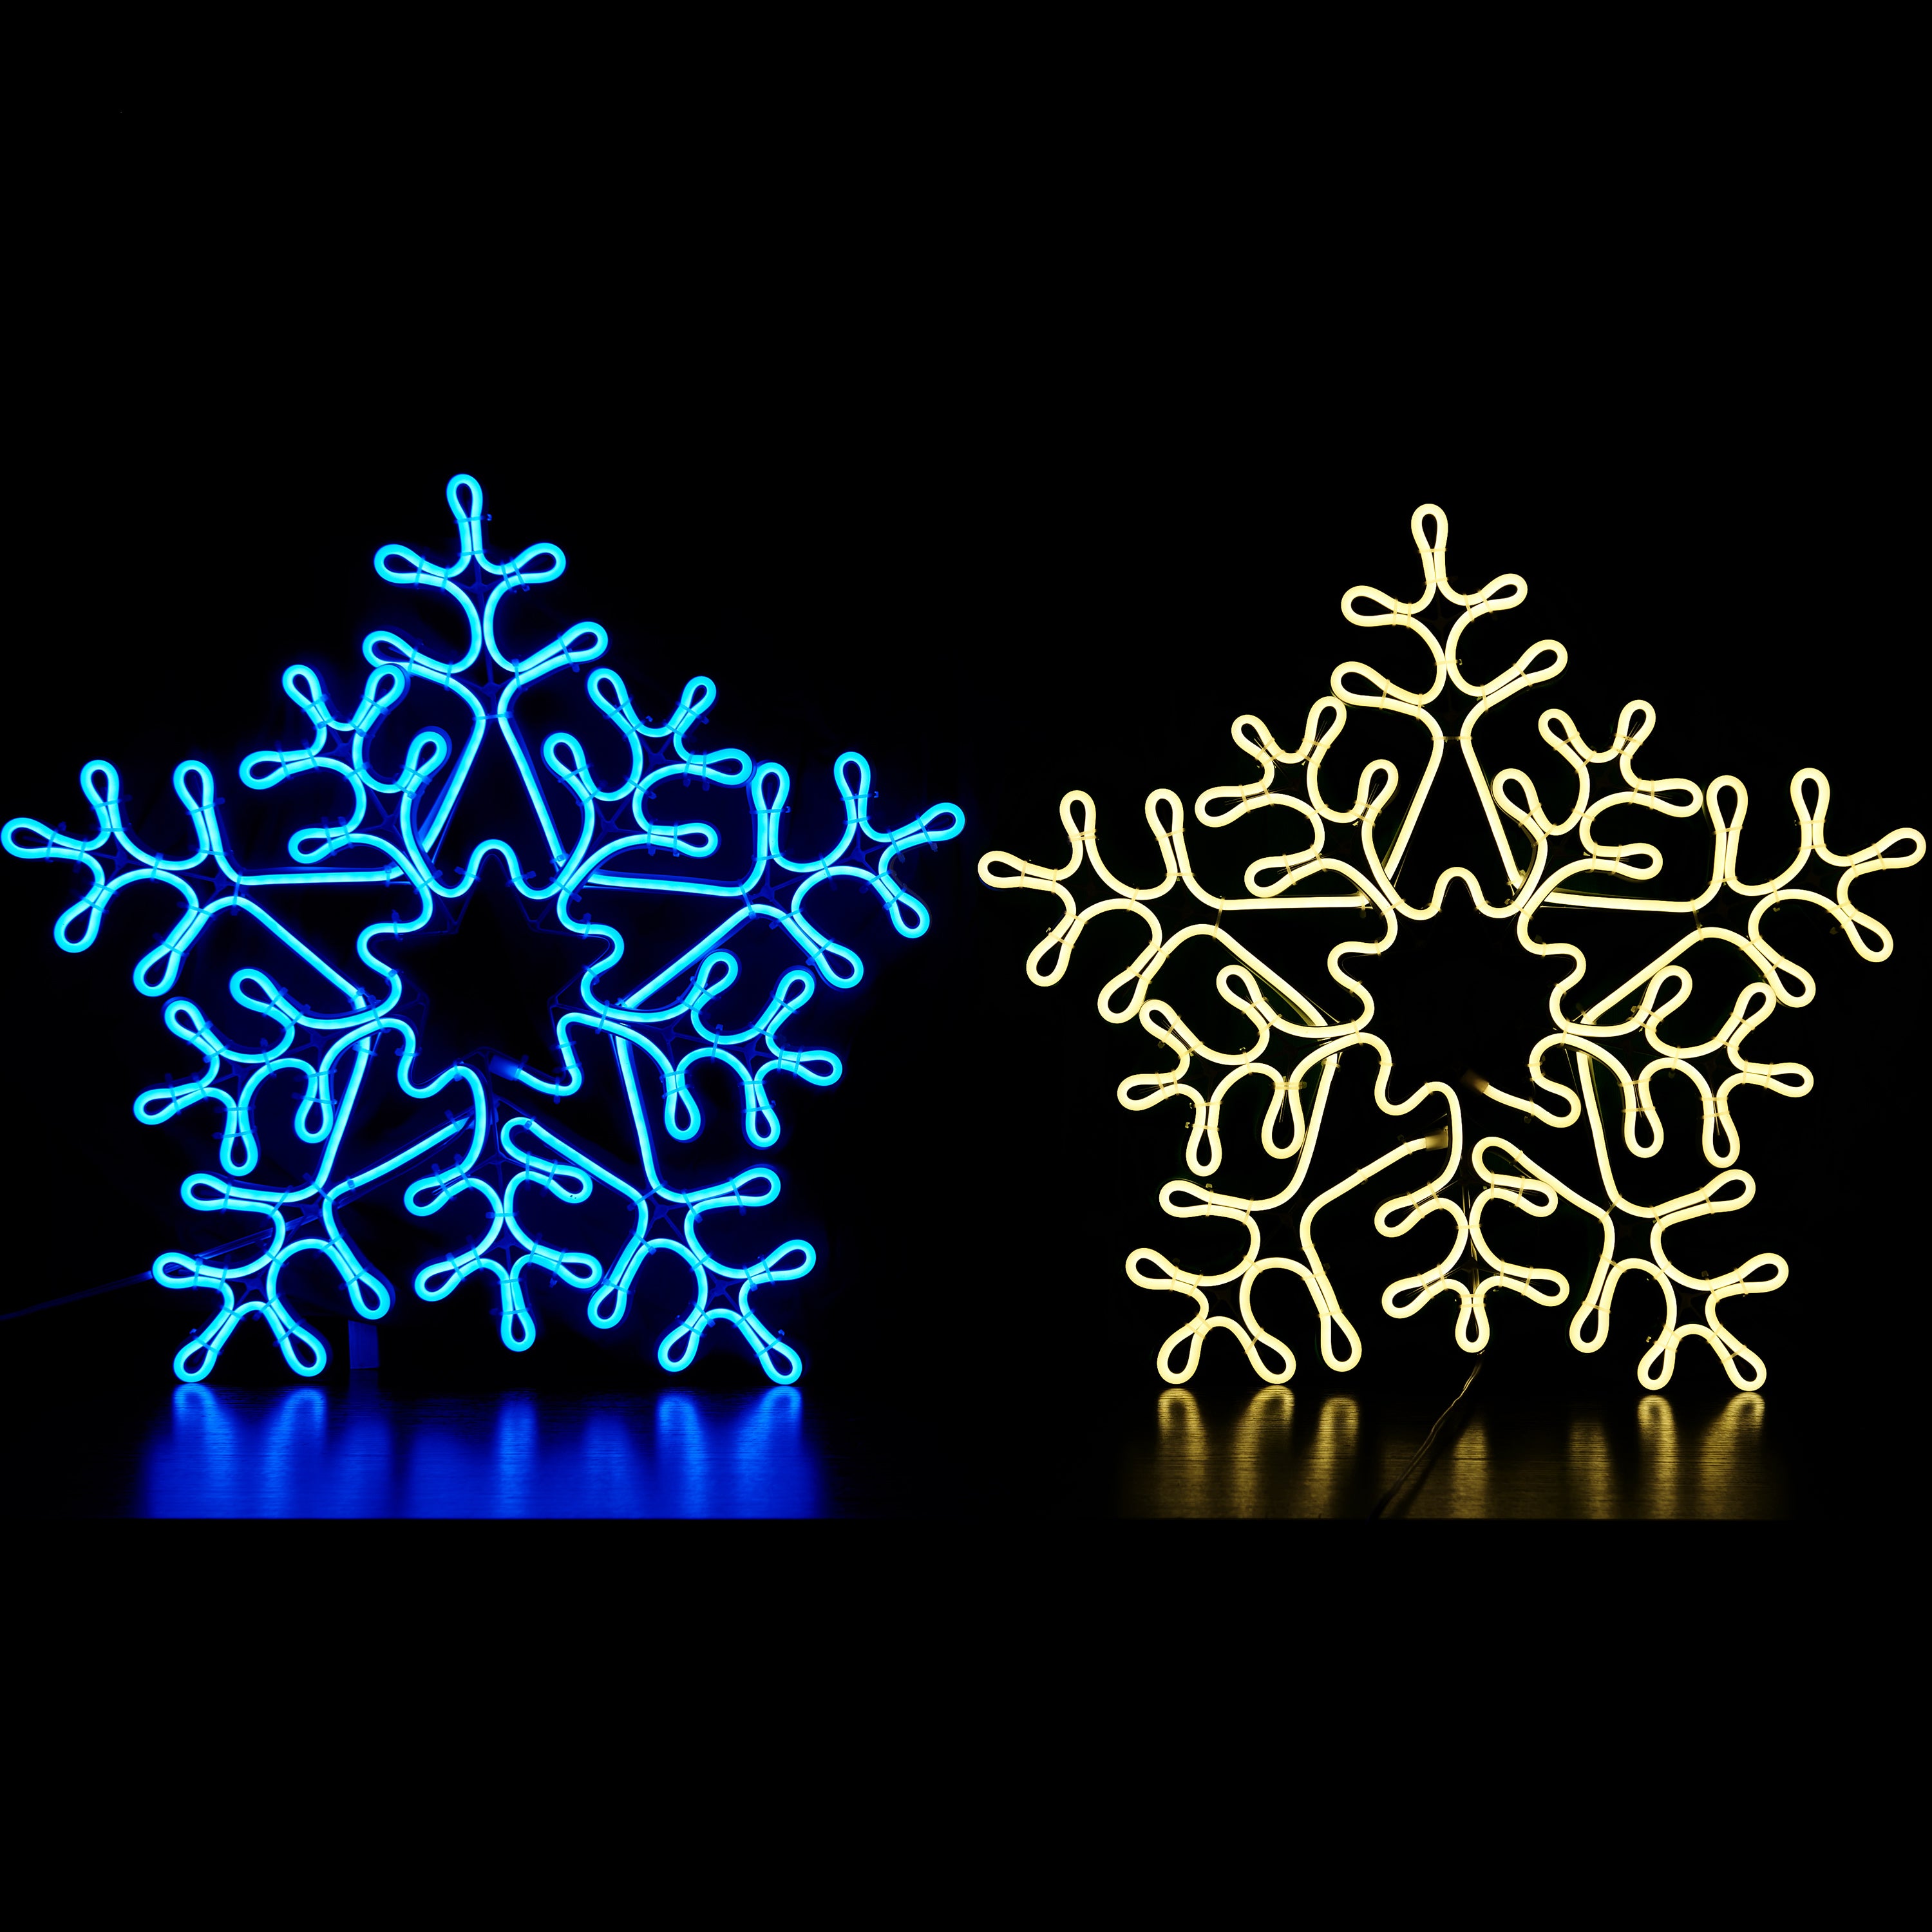 20IN Snowflake Neon Rope Light Decorative Light Indoor Ountdoor Use for Christmas Party Festival Wedding	, Warm White+Blue